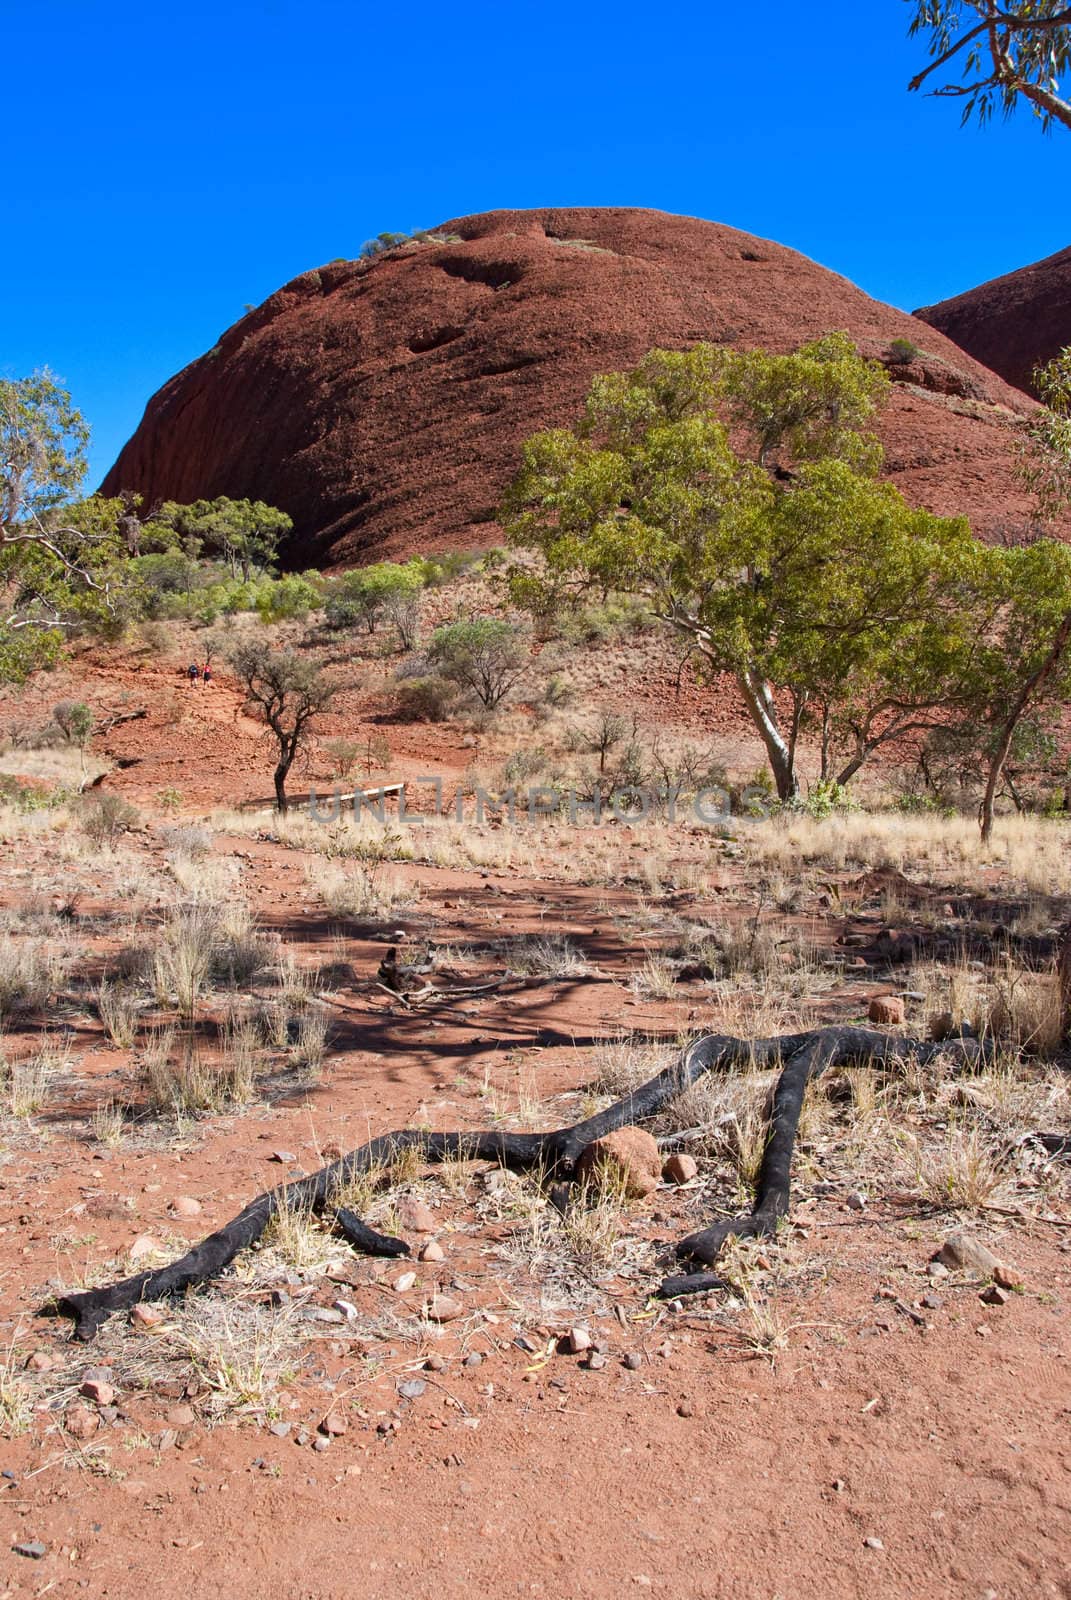 Australian Outback by jovannig